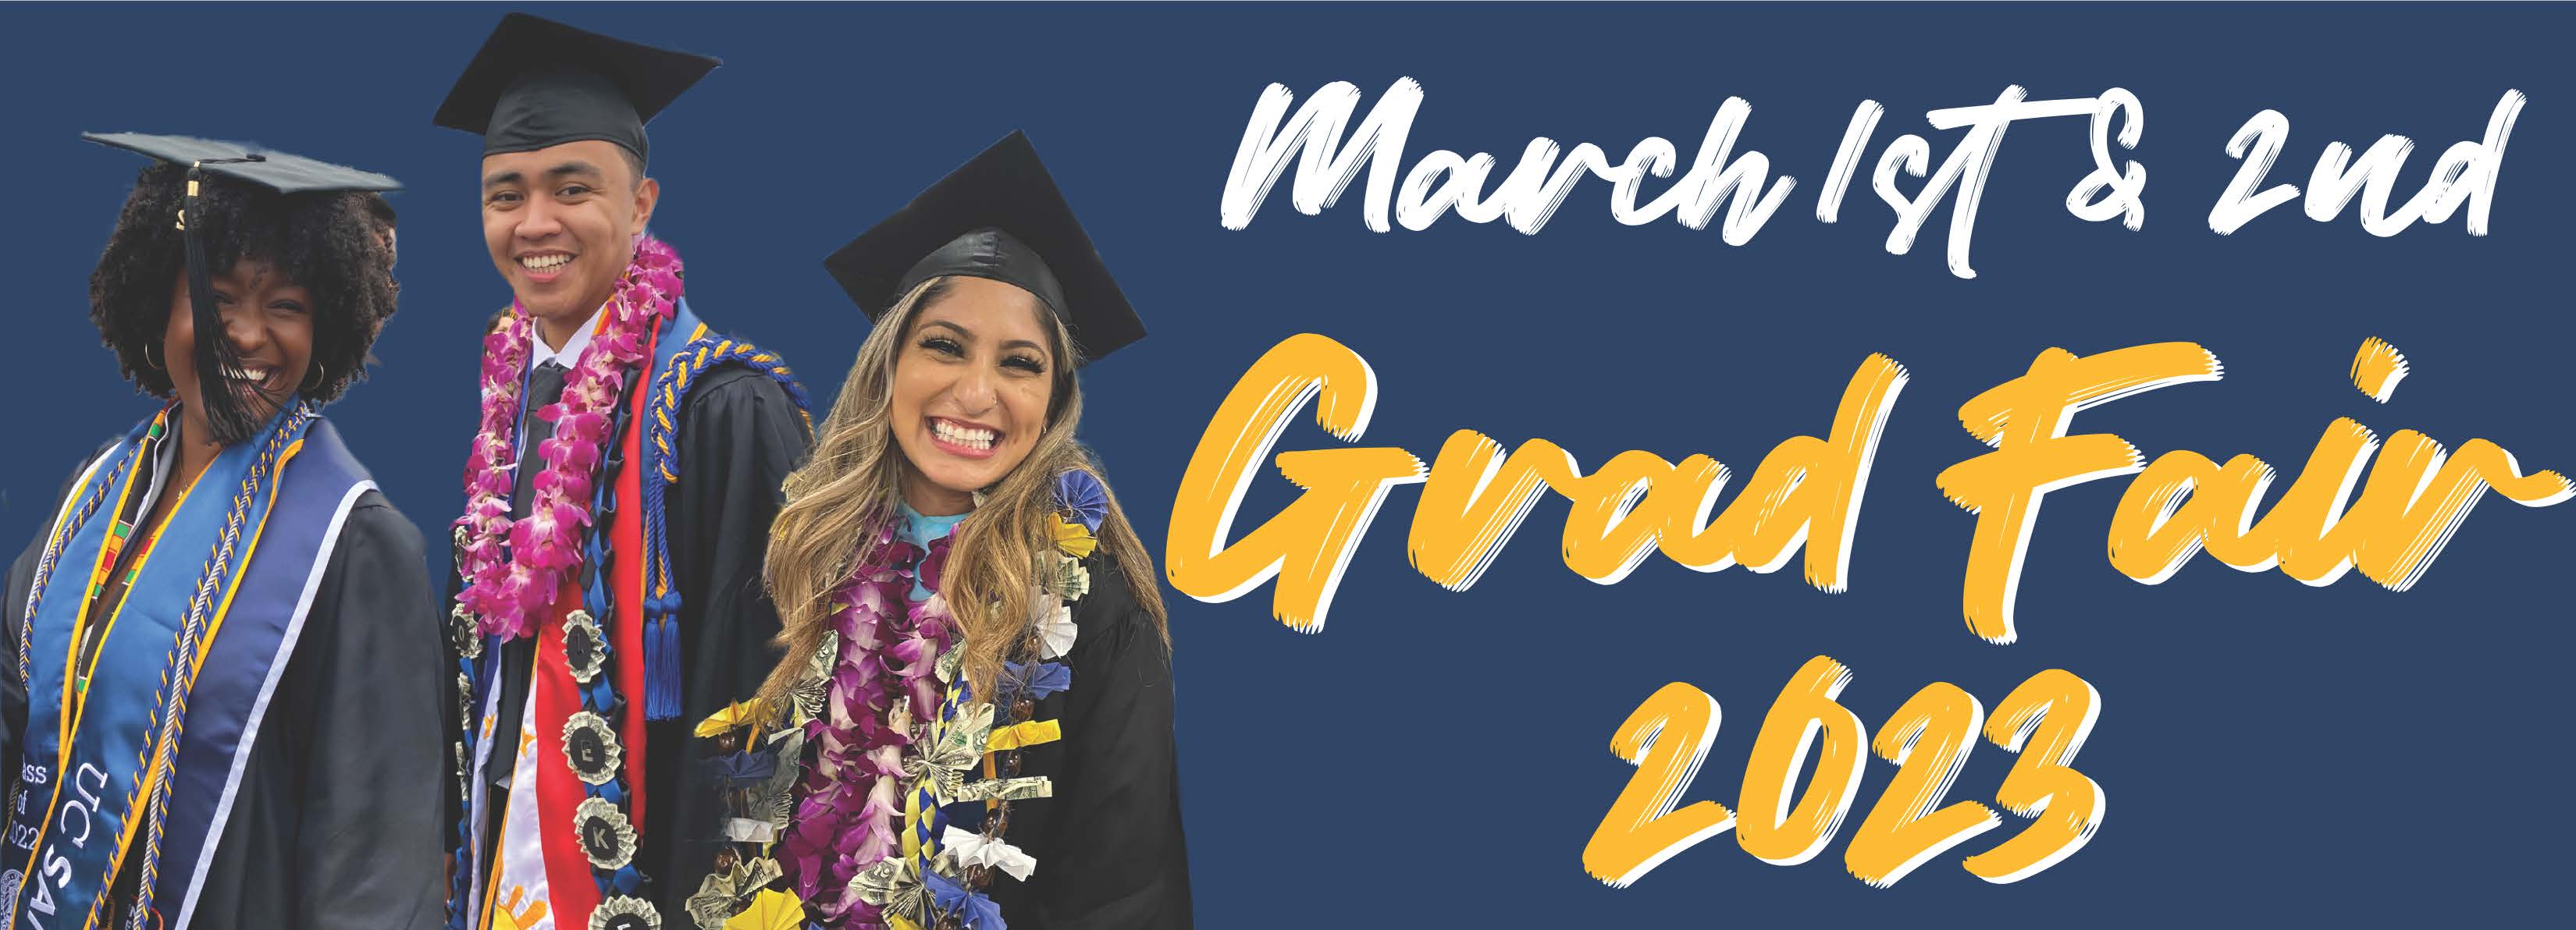 Grad Fair at the UCSB Campus Store